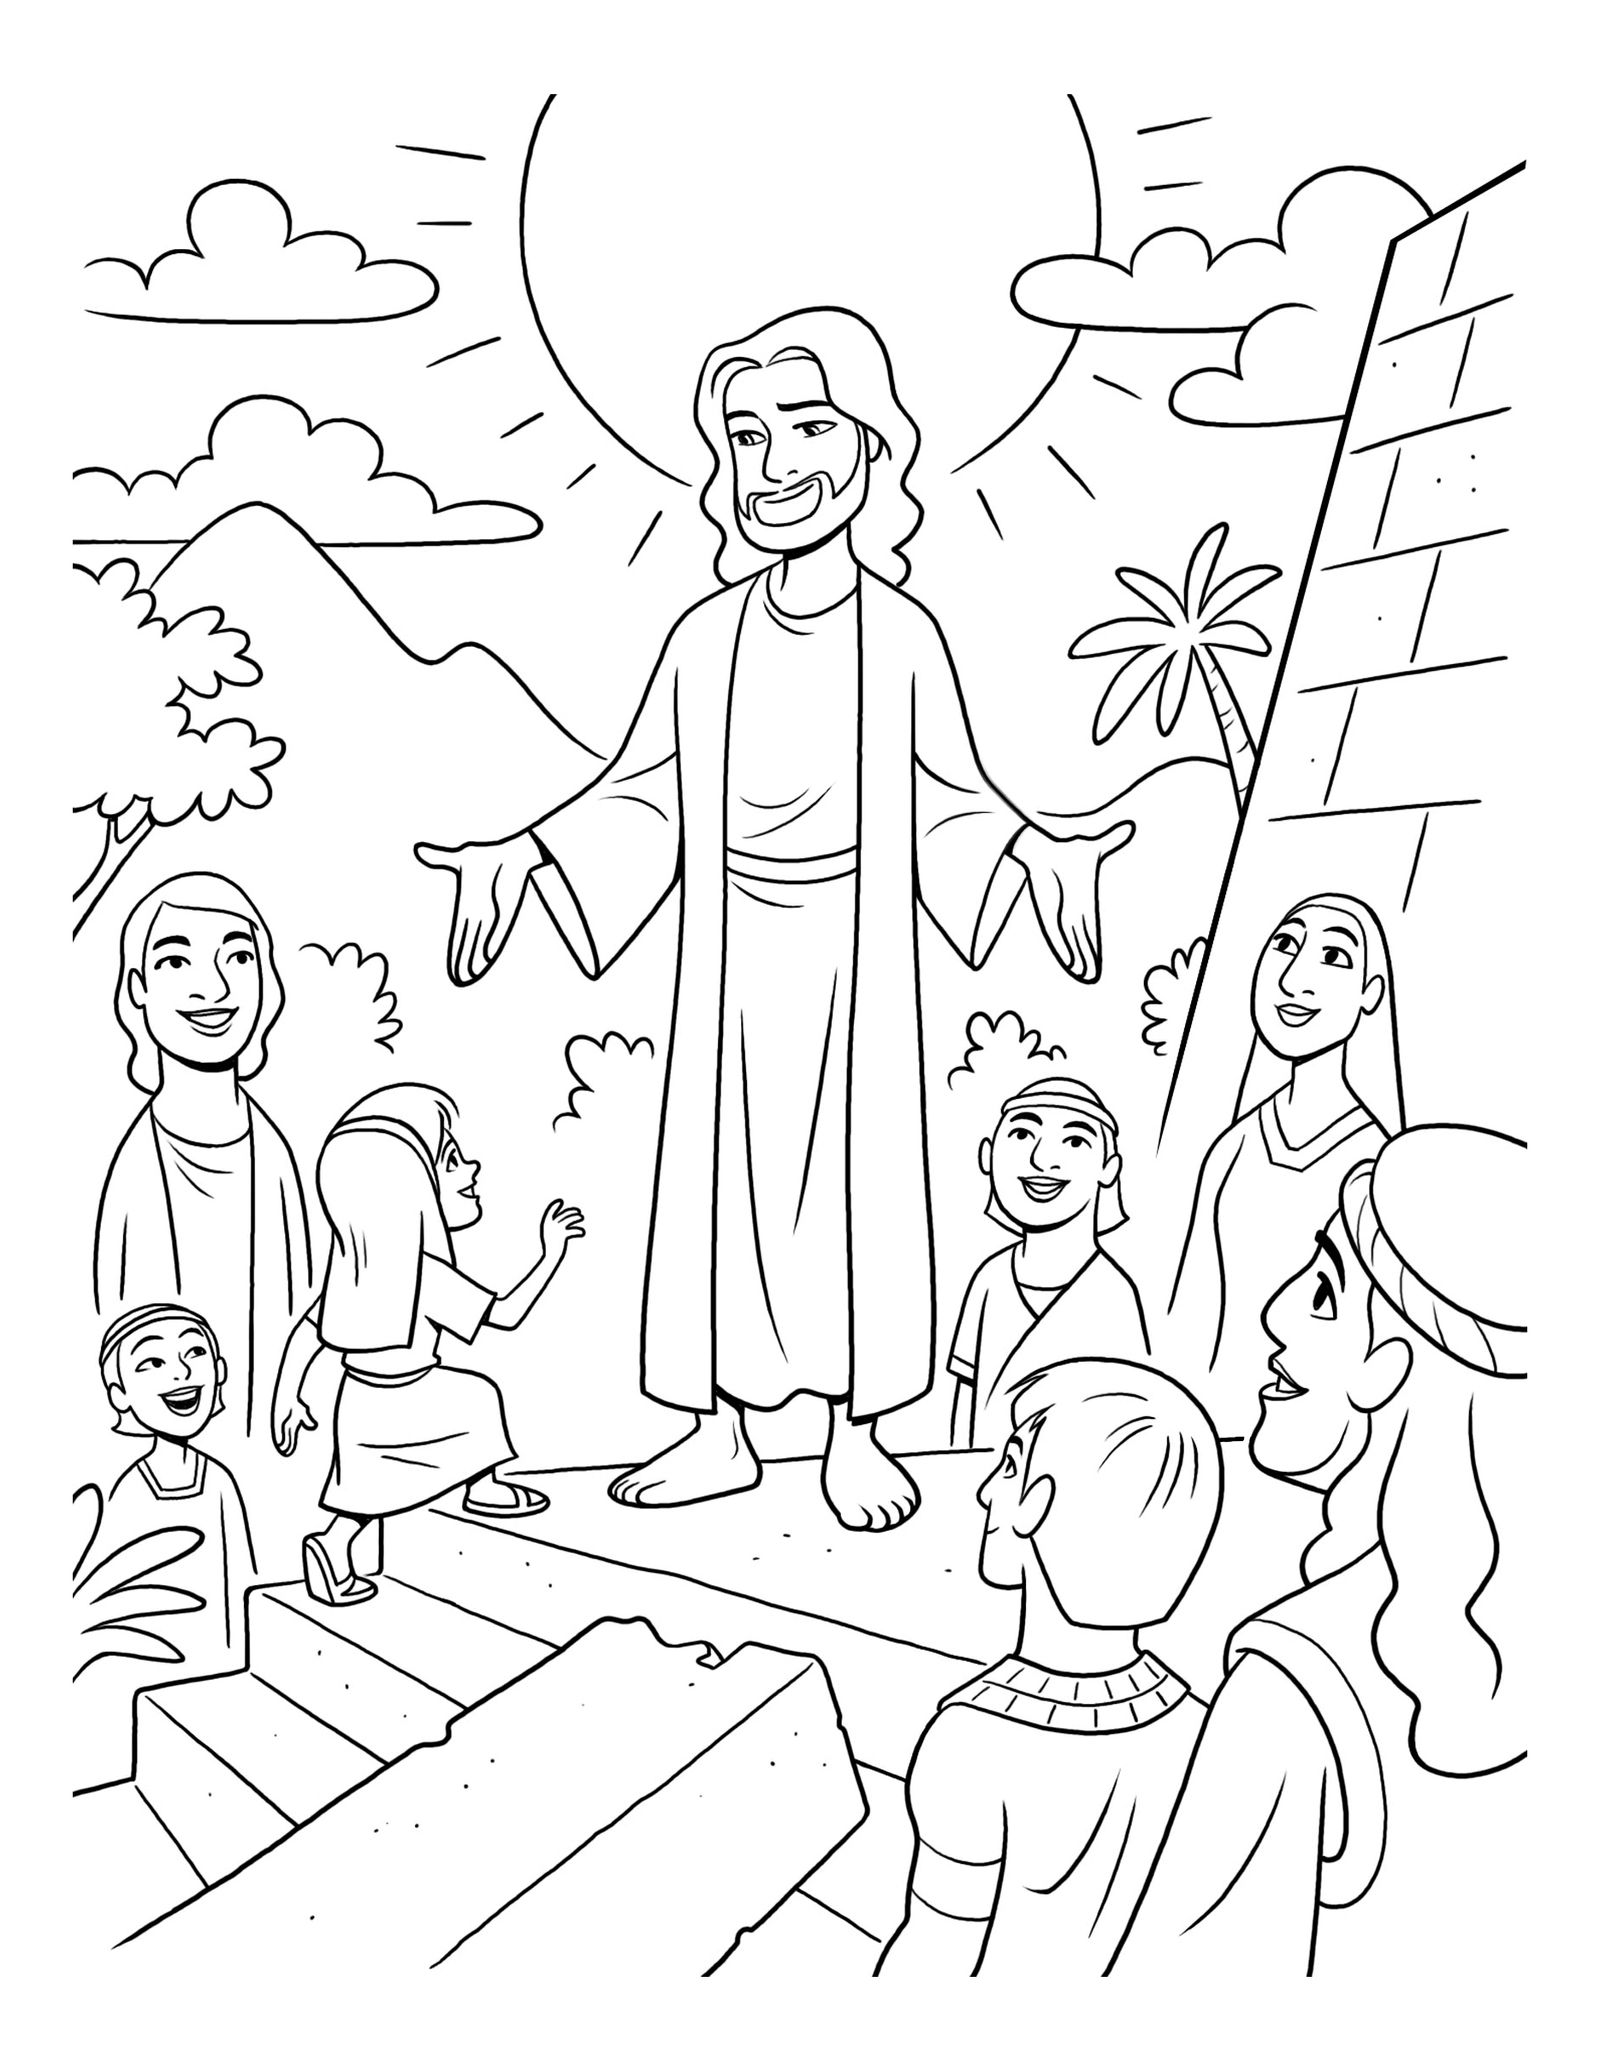 Christ visits the Nephites in the Americas as described in the Book of Mormon.